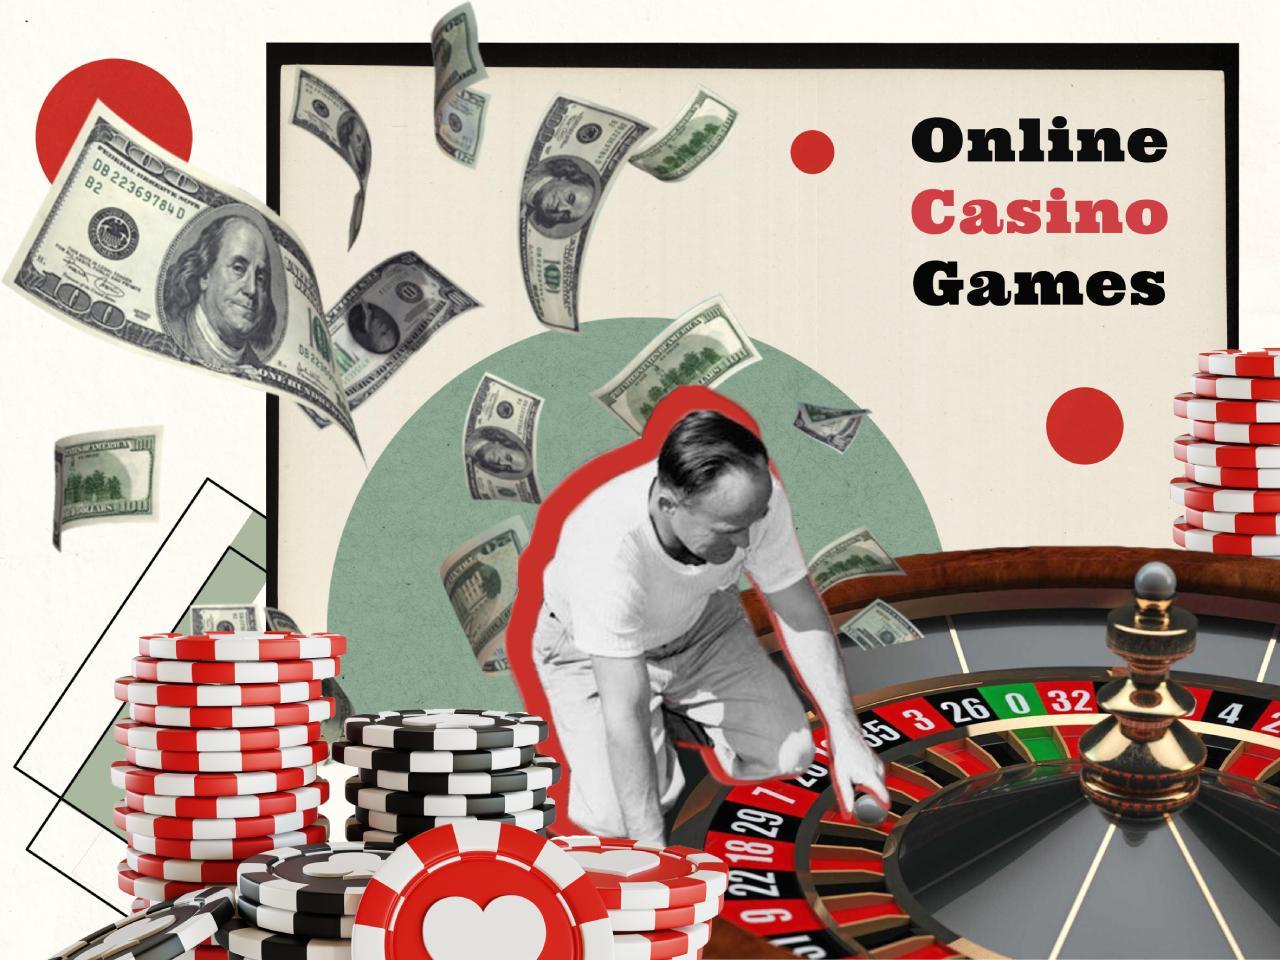 Need More Inspiration With casino? Read this!